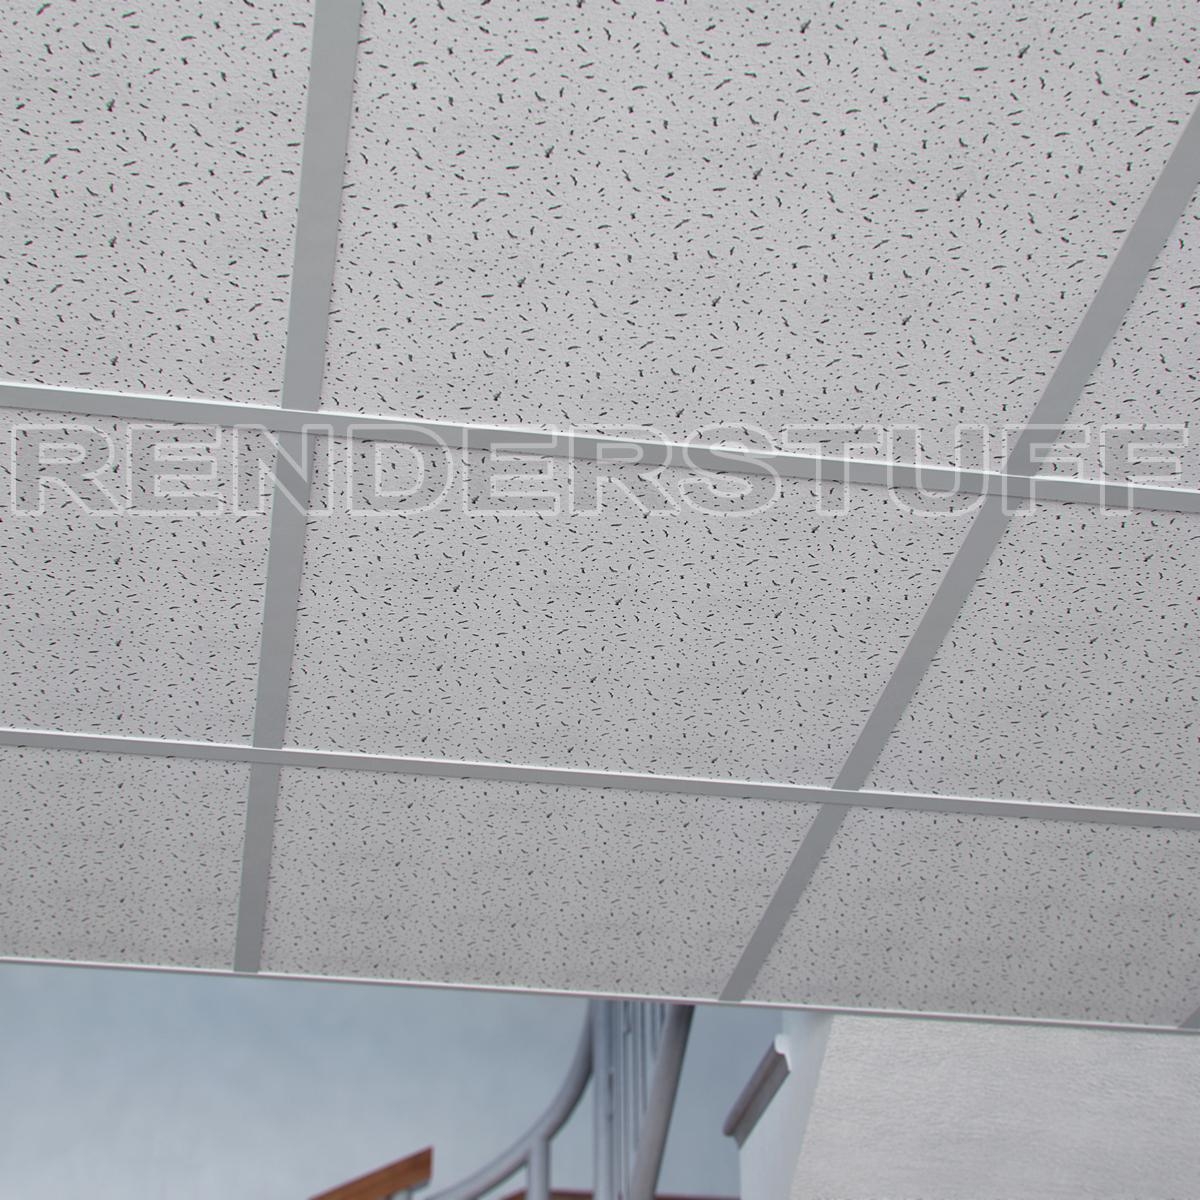 Dropped Ceiling Tiles Armstrong Dropped Ceiling Tiles Armstrong vwartclub armstrong suspended ceiling about ceiling tile 1200 X 1200